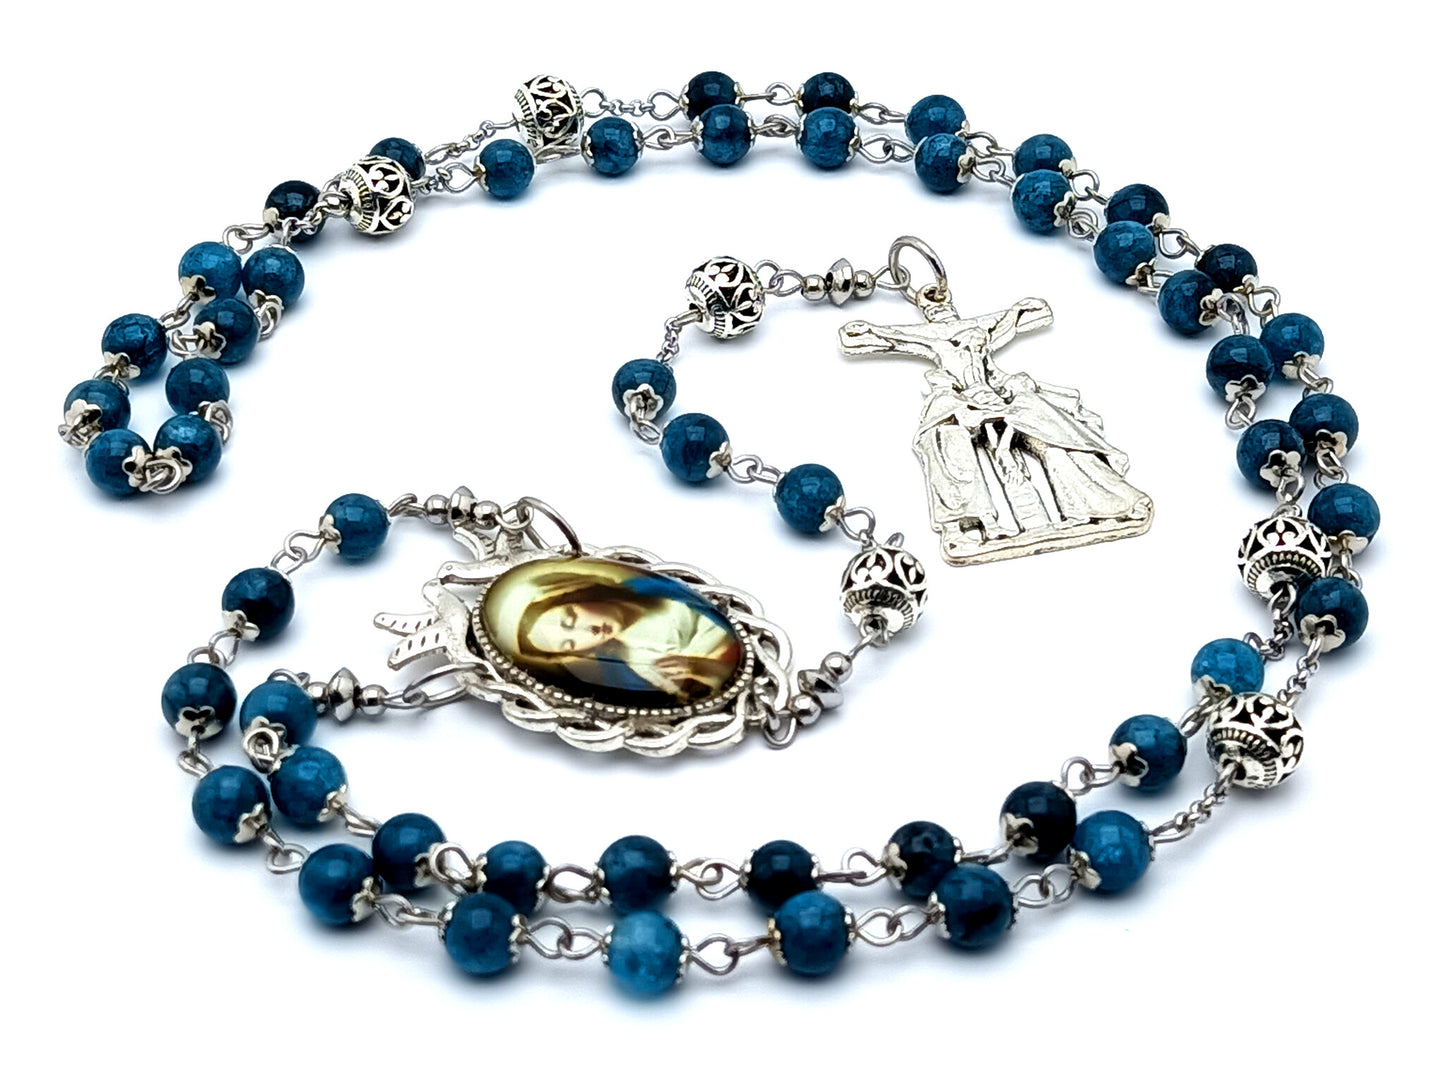 Our Lady of Sorrows unique rosary beads with apatite gemstone and Tibetan silver beads and Saint John and Mary at the foot of the Cross crucifix.